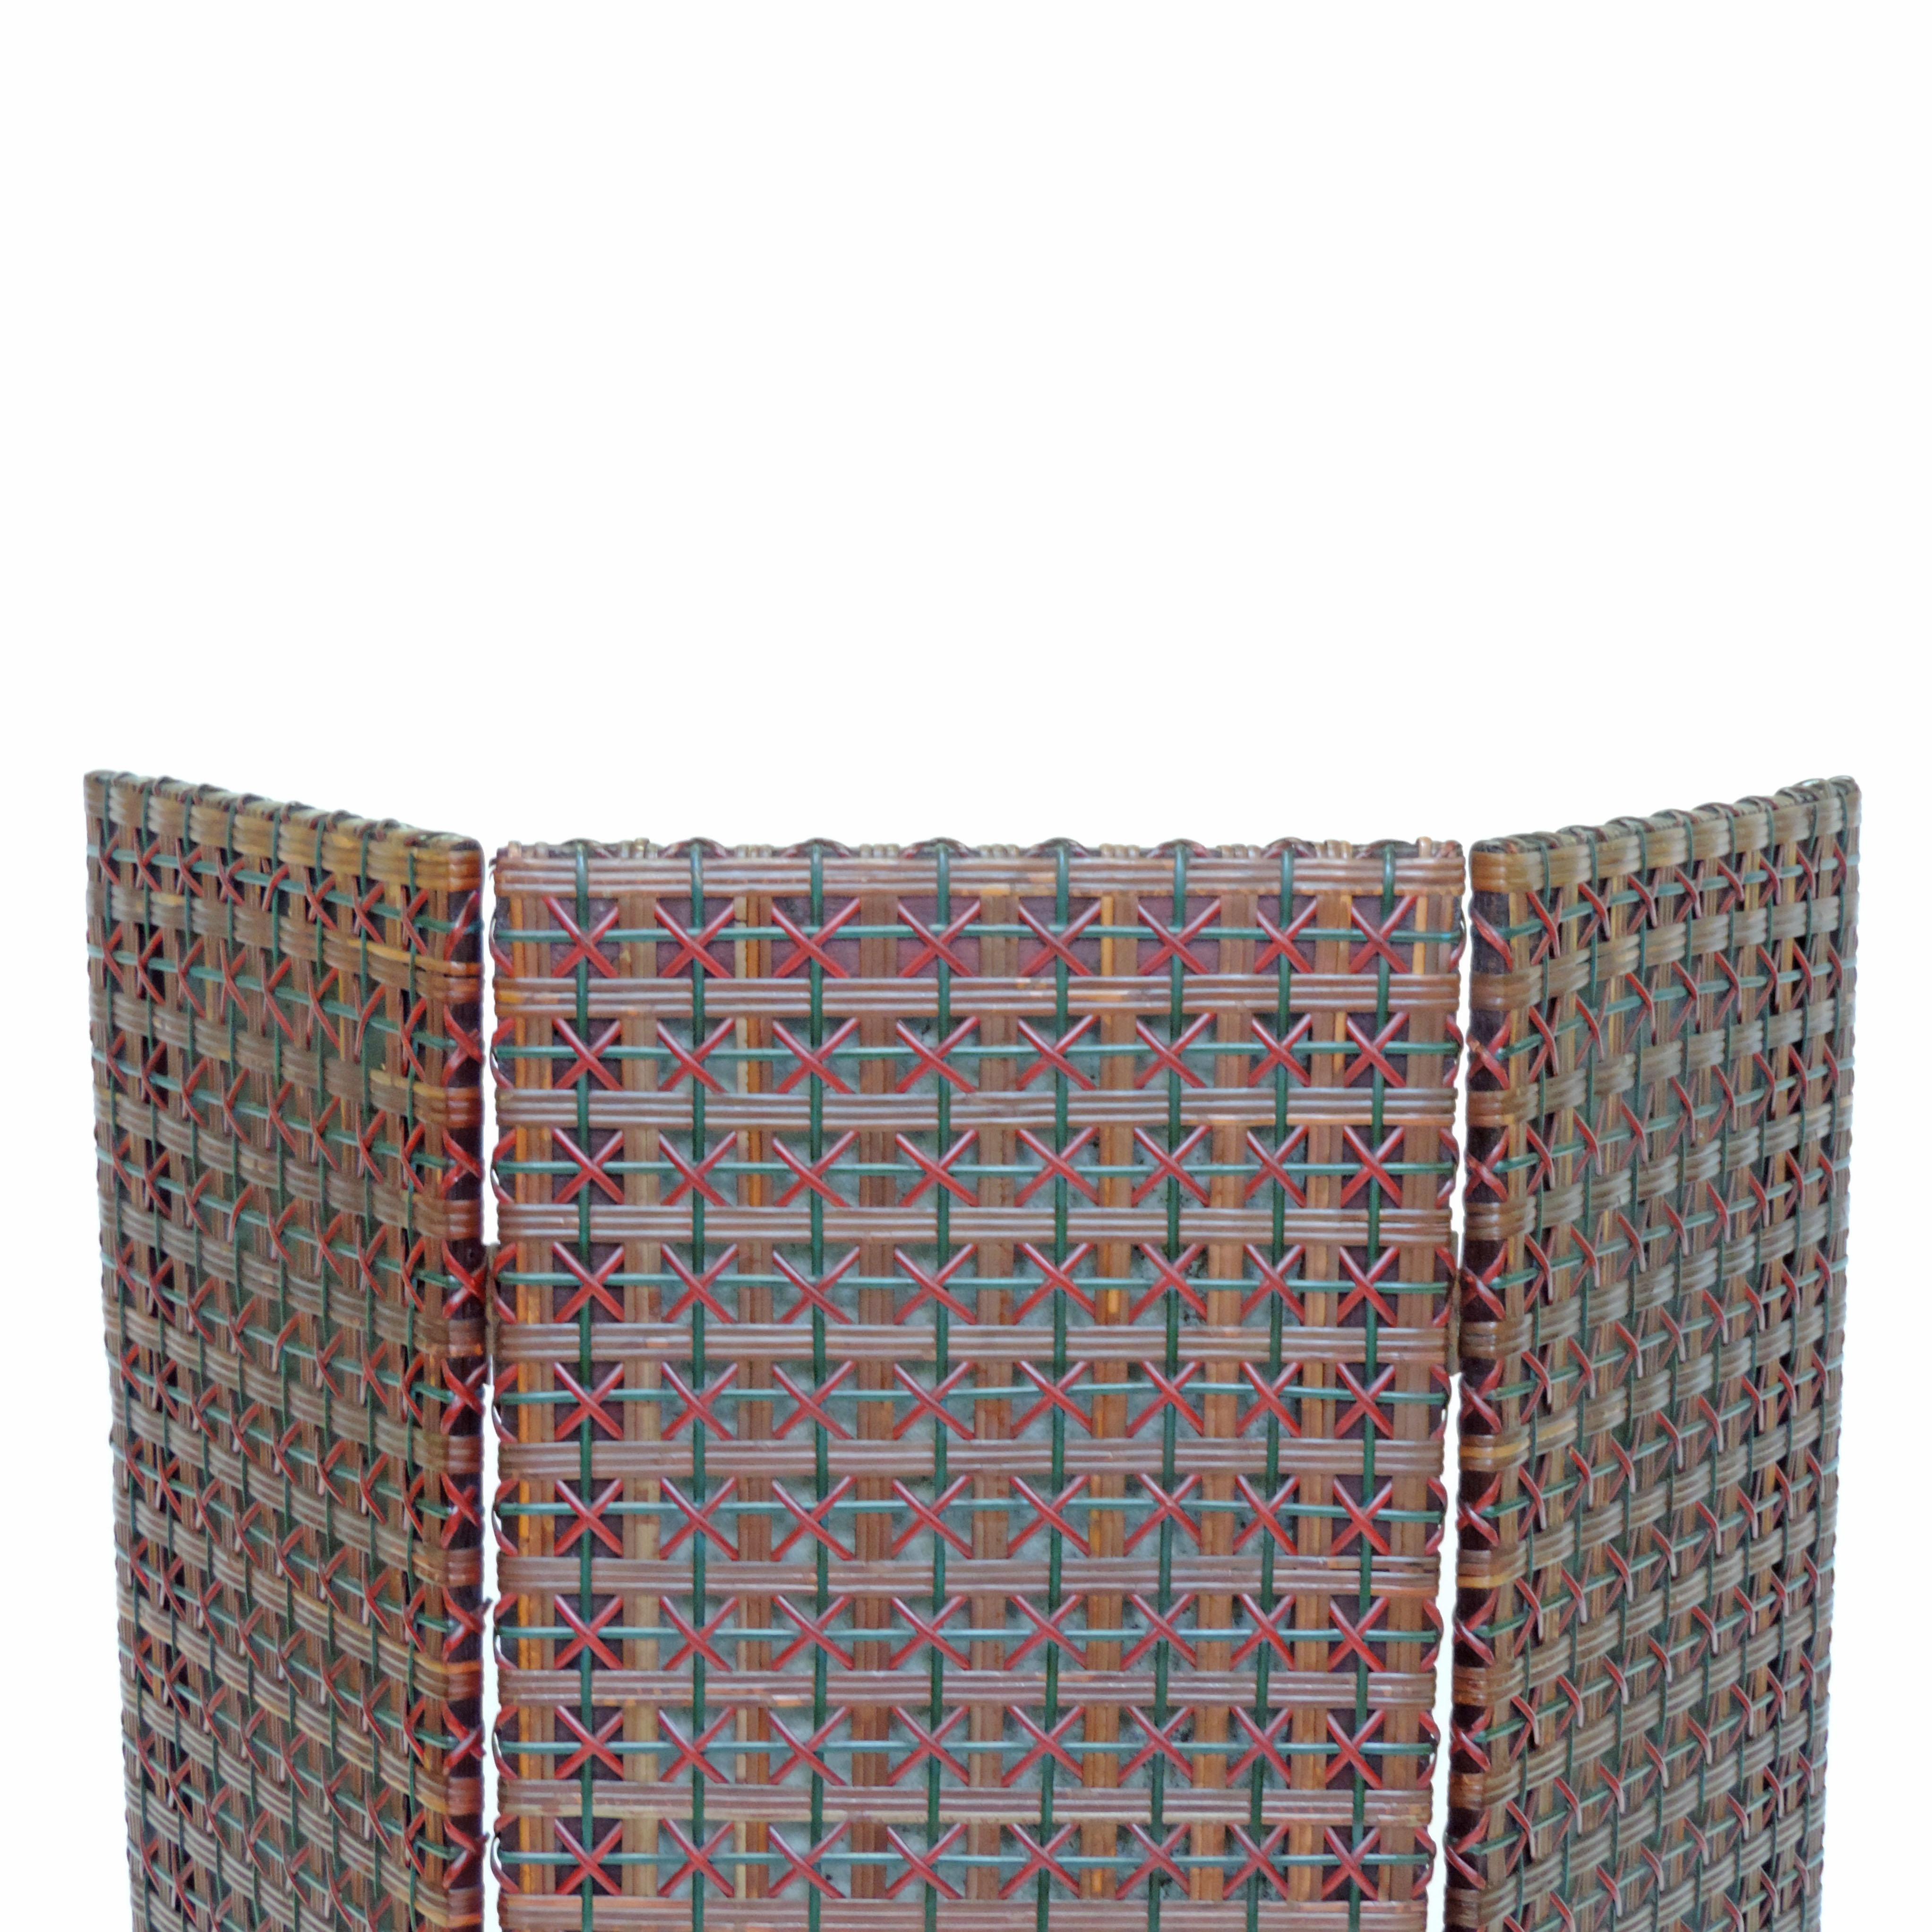 Italian Early 20th Century Foldable Colored Wicker Fire Screen For Sale 4